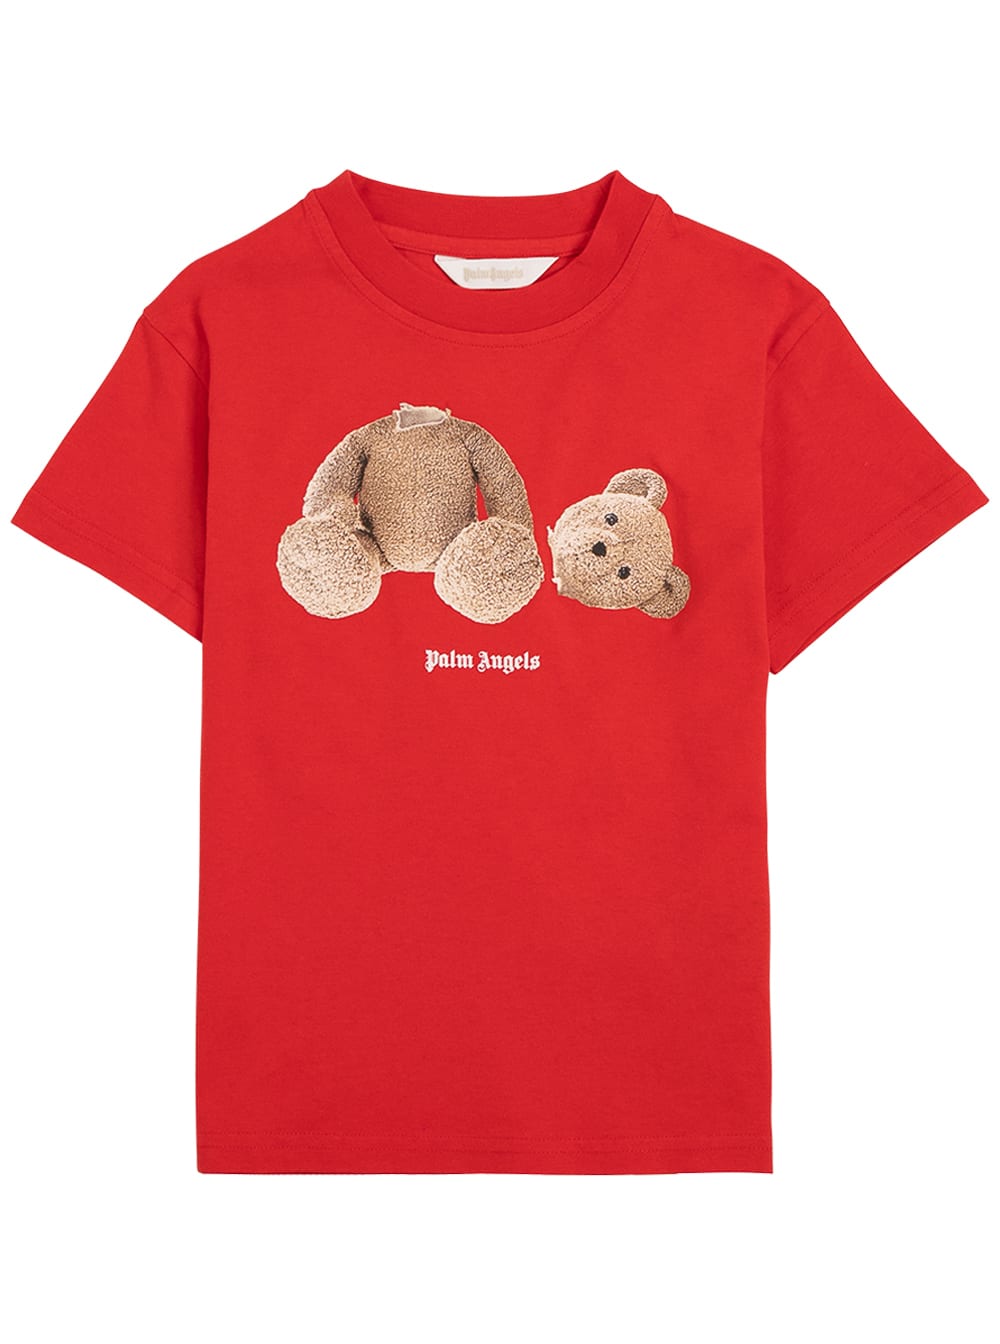 Palm Angels Red Cotton T-shirt With Teddy Bear Print